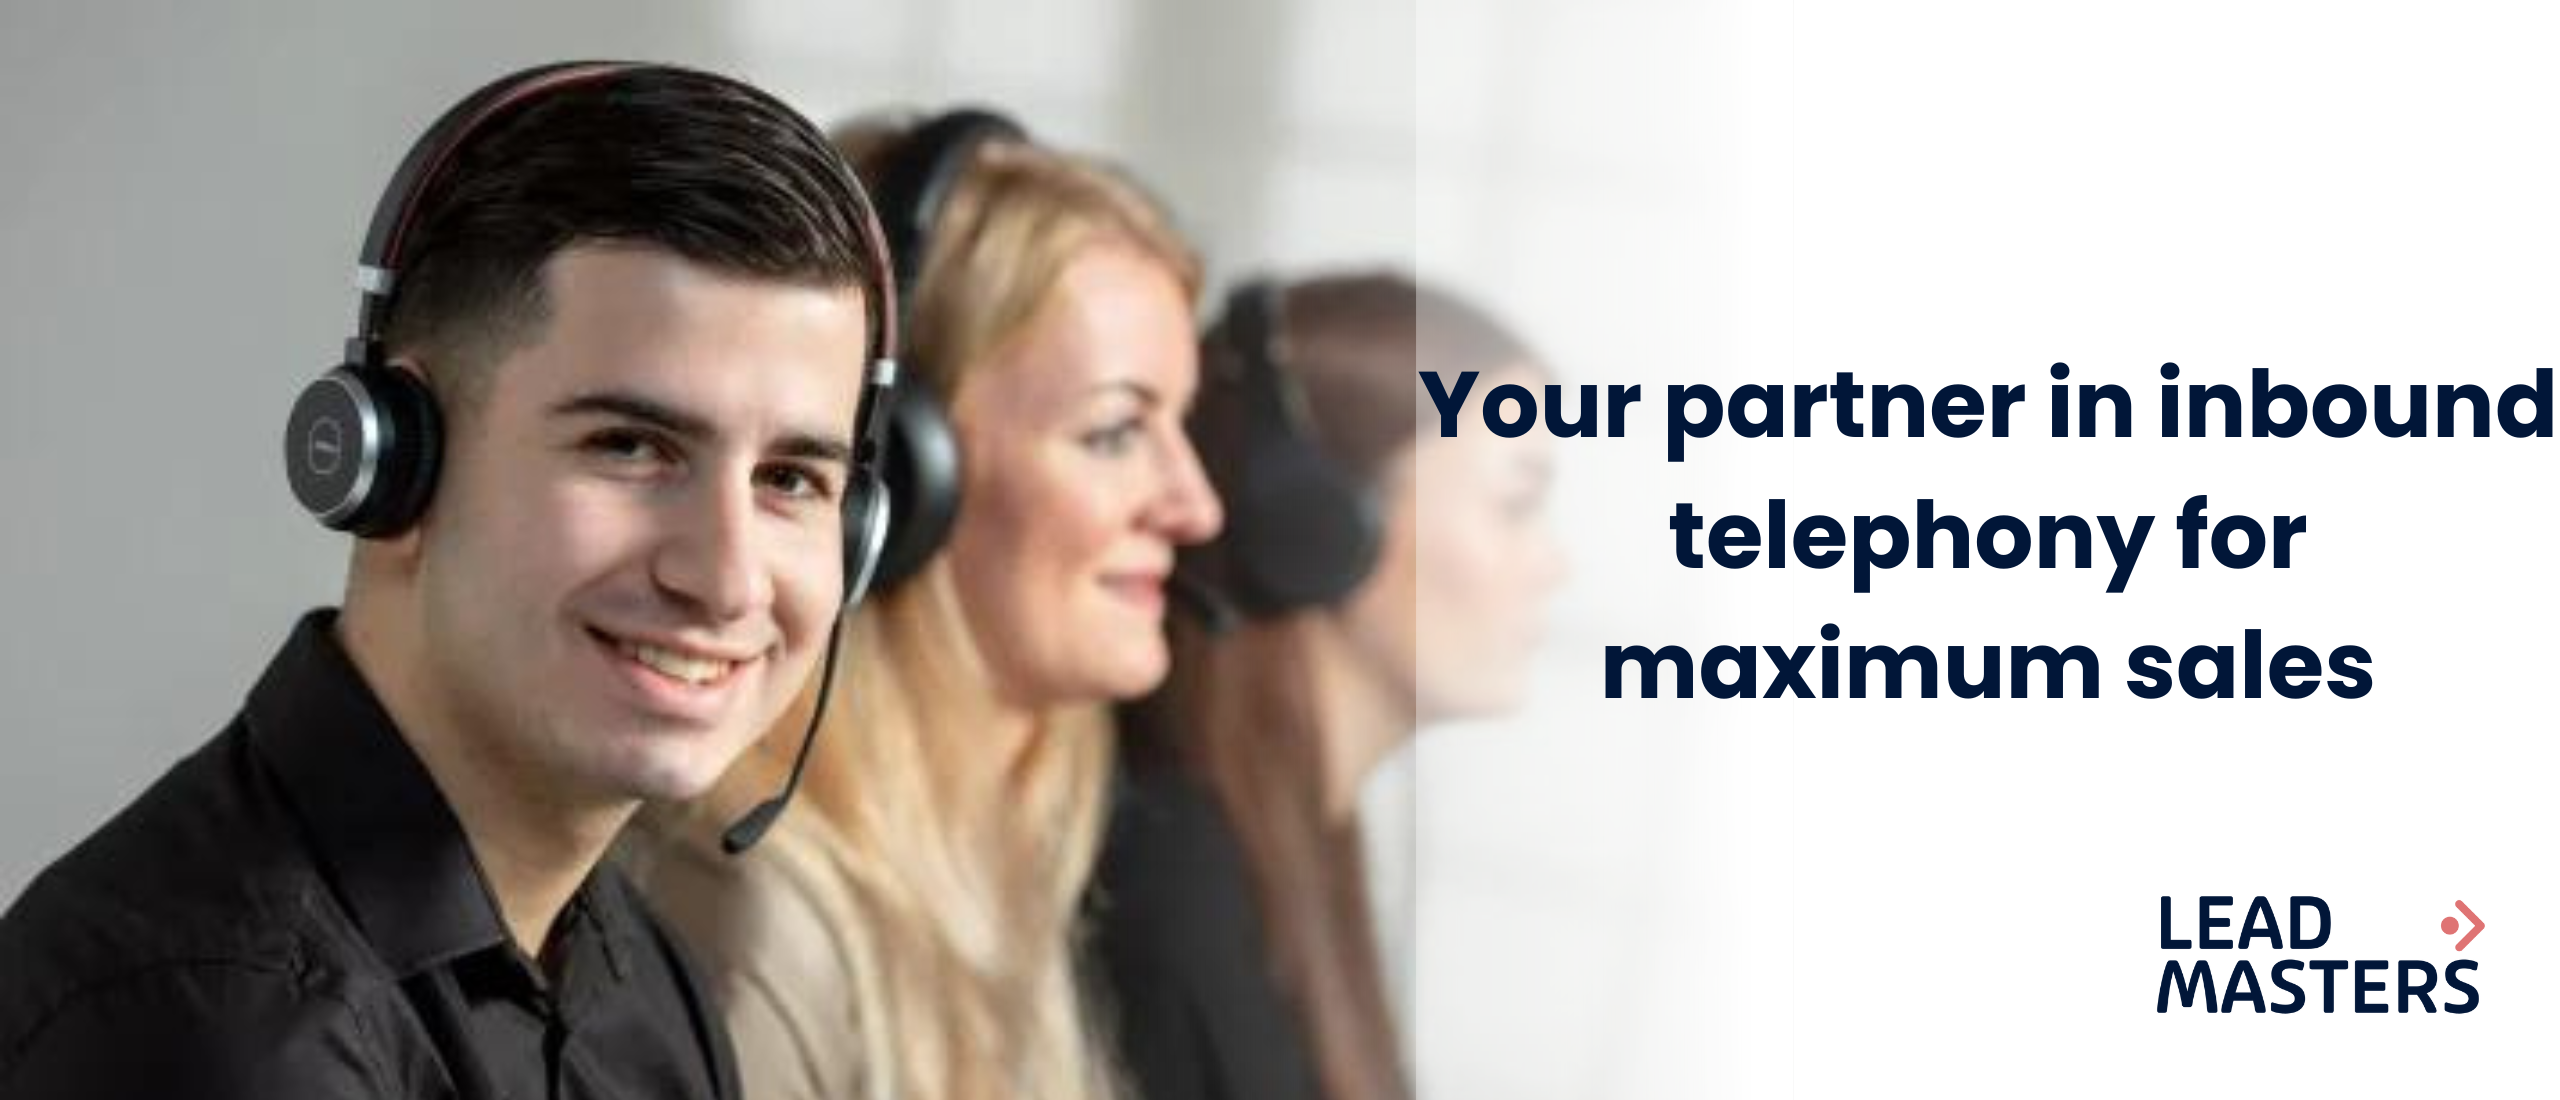 Your partner in inbound telephony for maximum sales